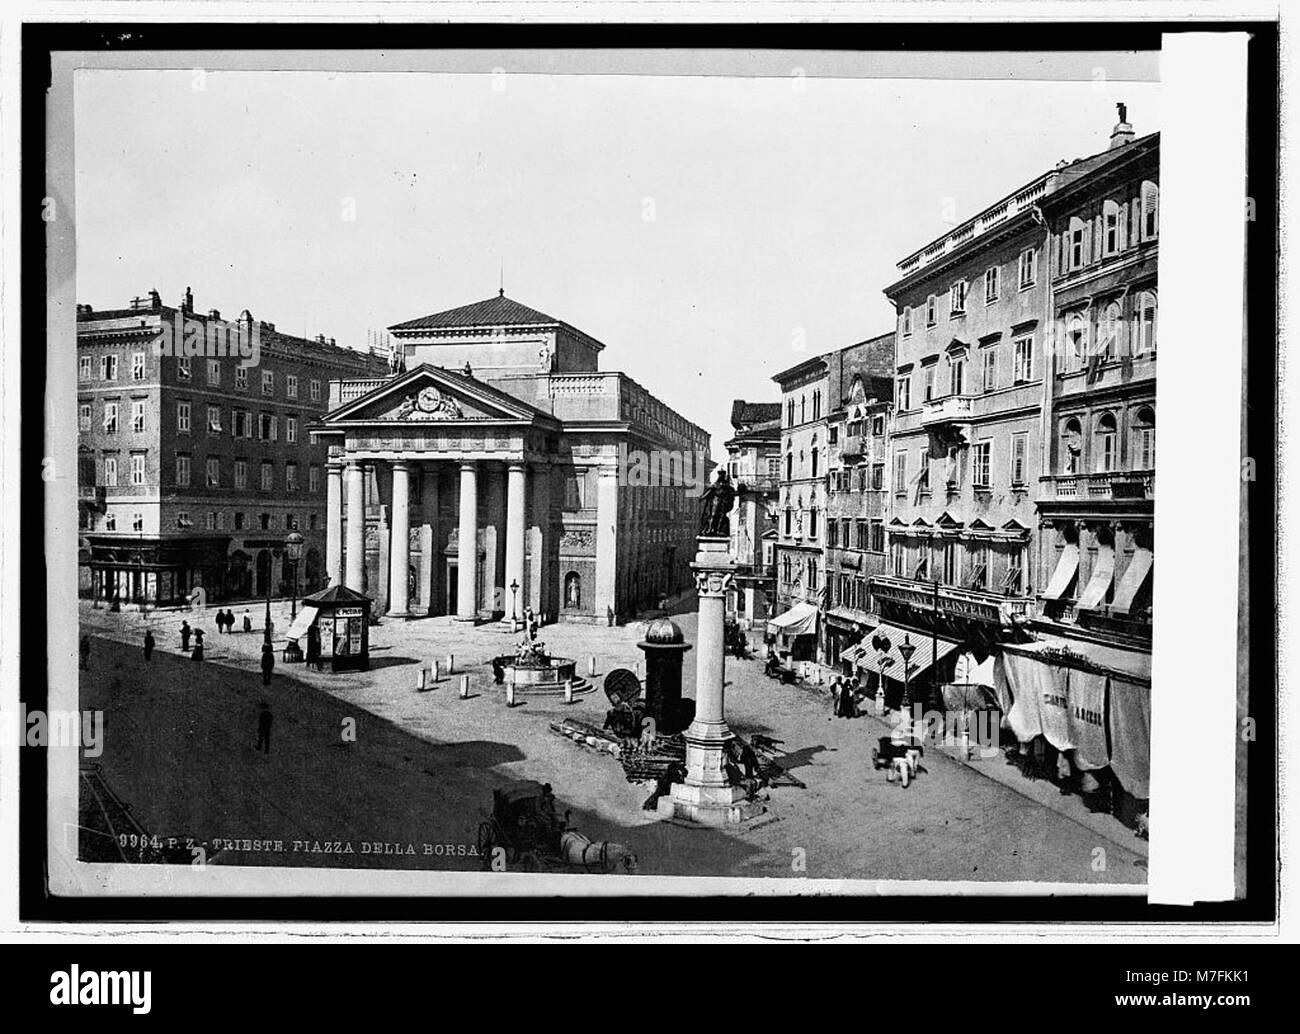 Trieste history Black and White Stock Photos & Images - Alamy